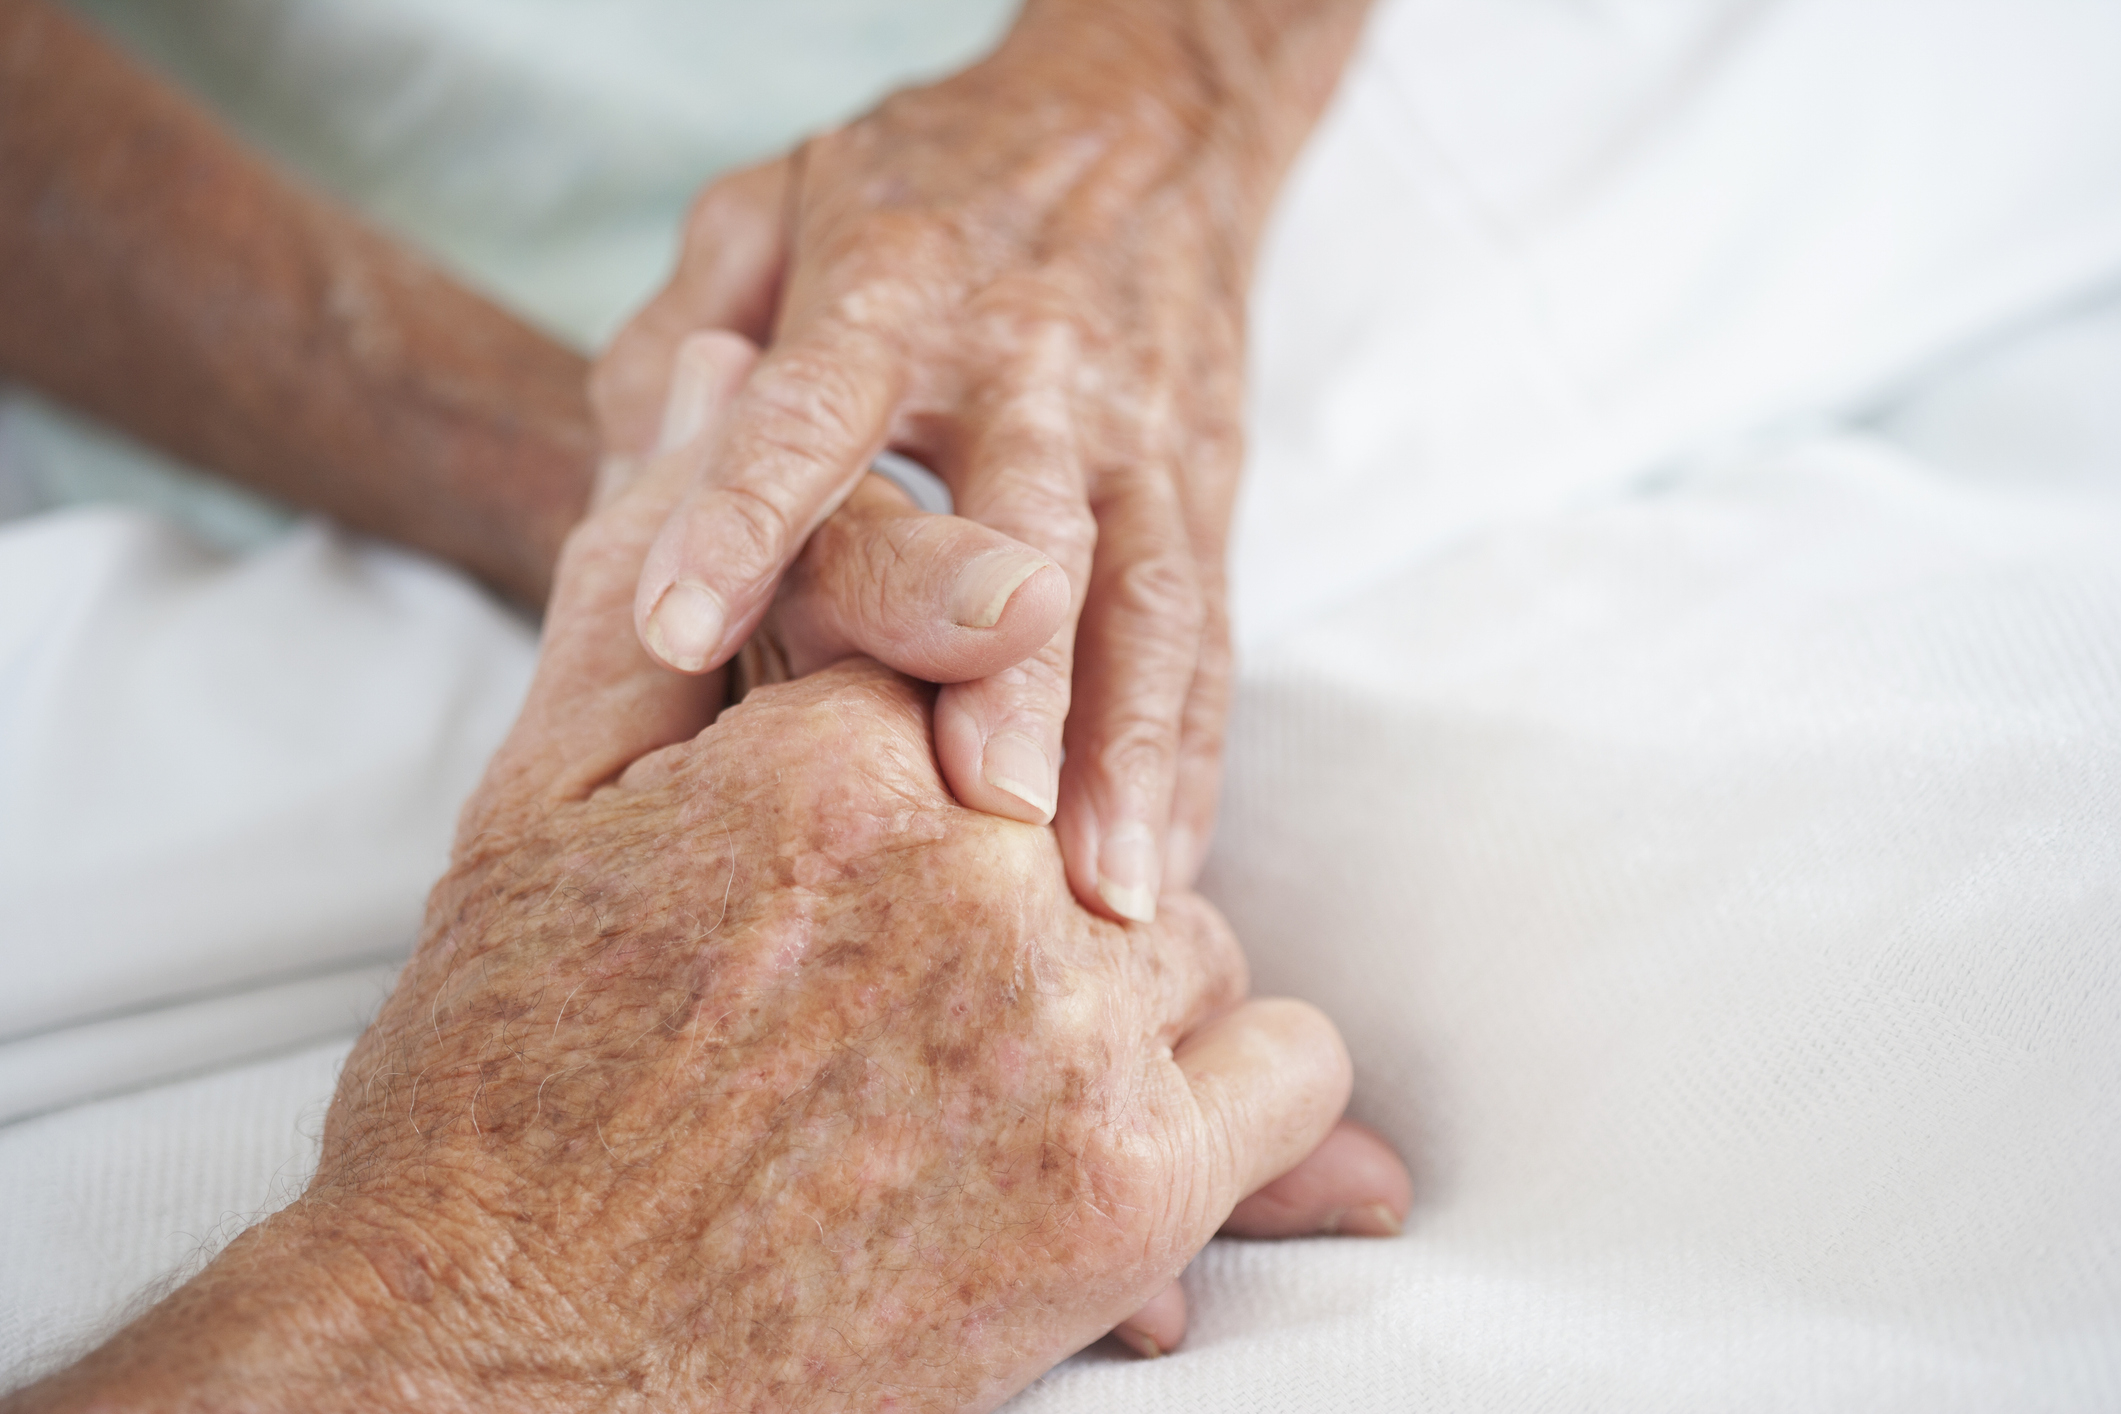 A close-up of a younger person&#x27;s hand holding an elderly person&#x27;s hand, offering comfort or support